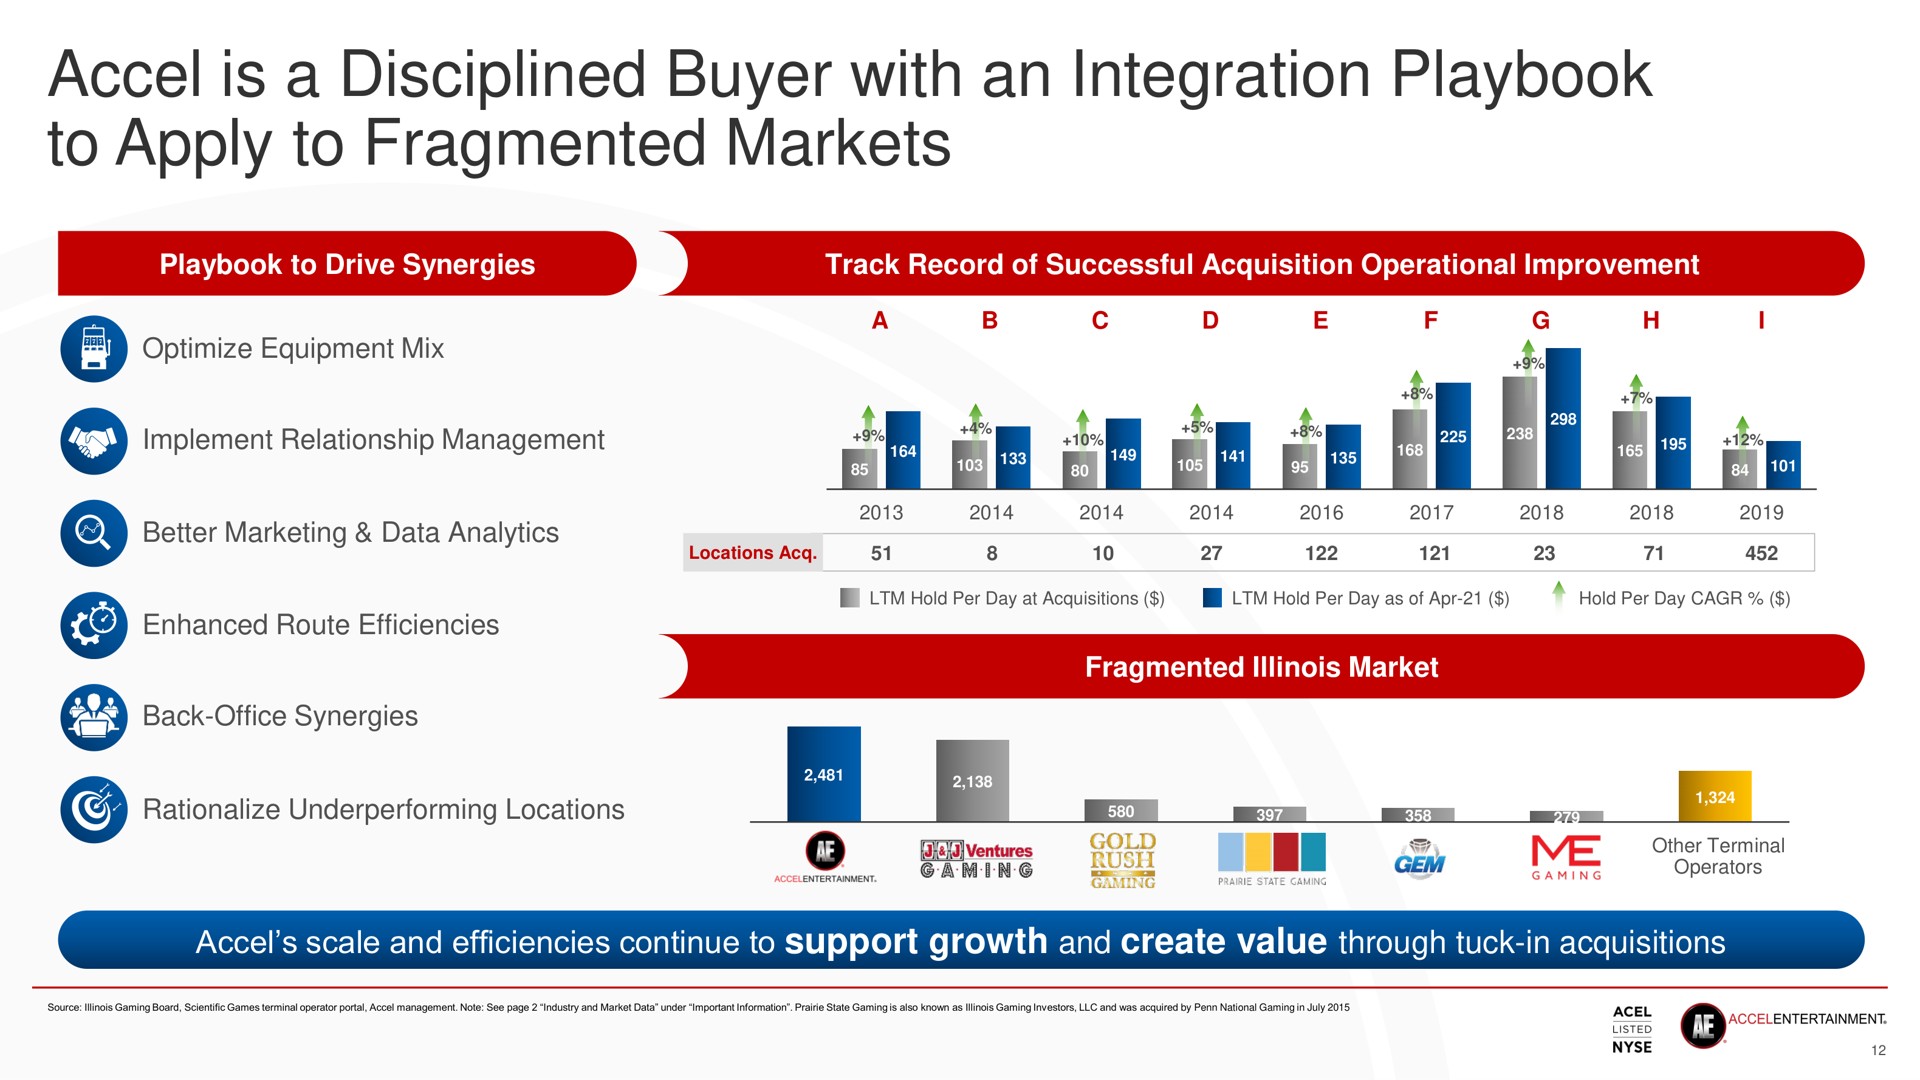 is a disciplined buyer with an integration playbook to apply to fragmented markets | Accel Entertaiment